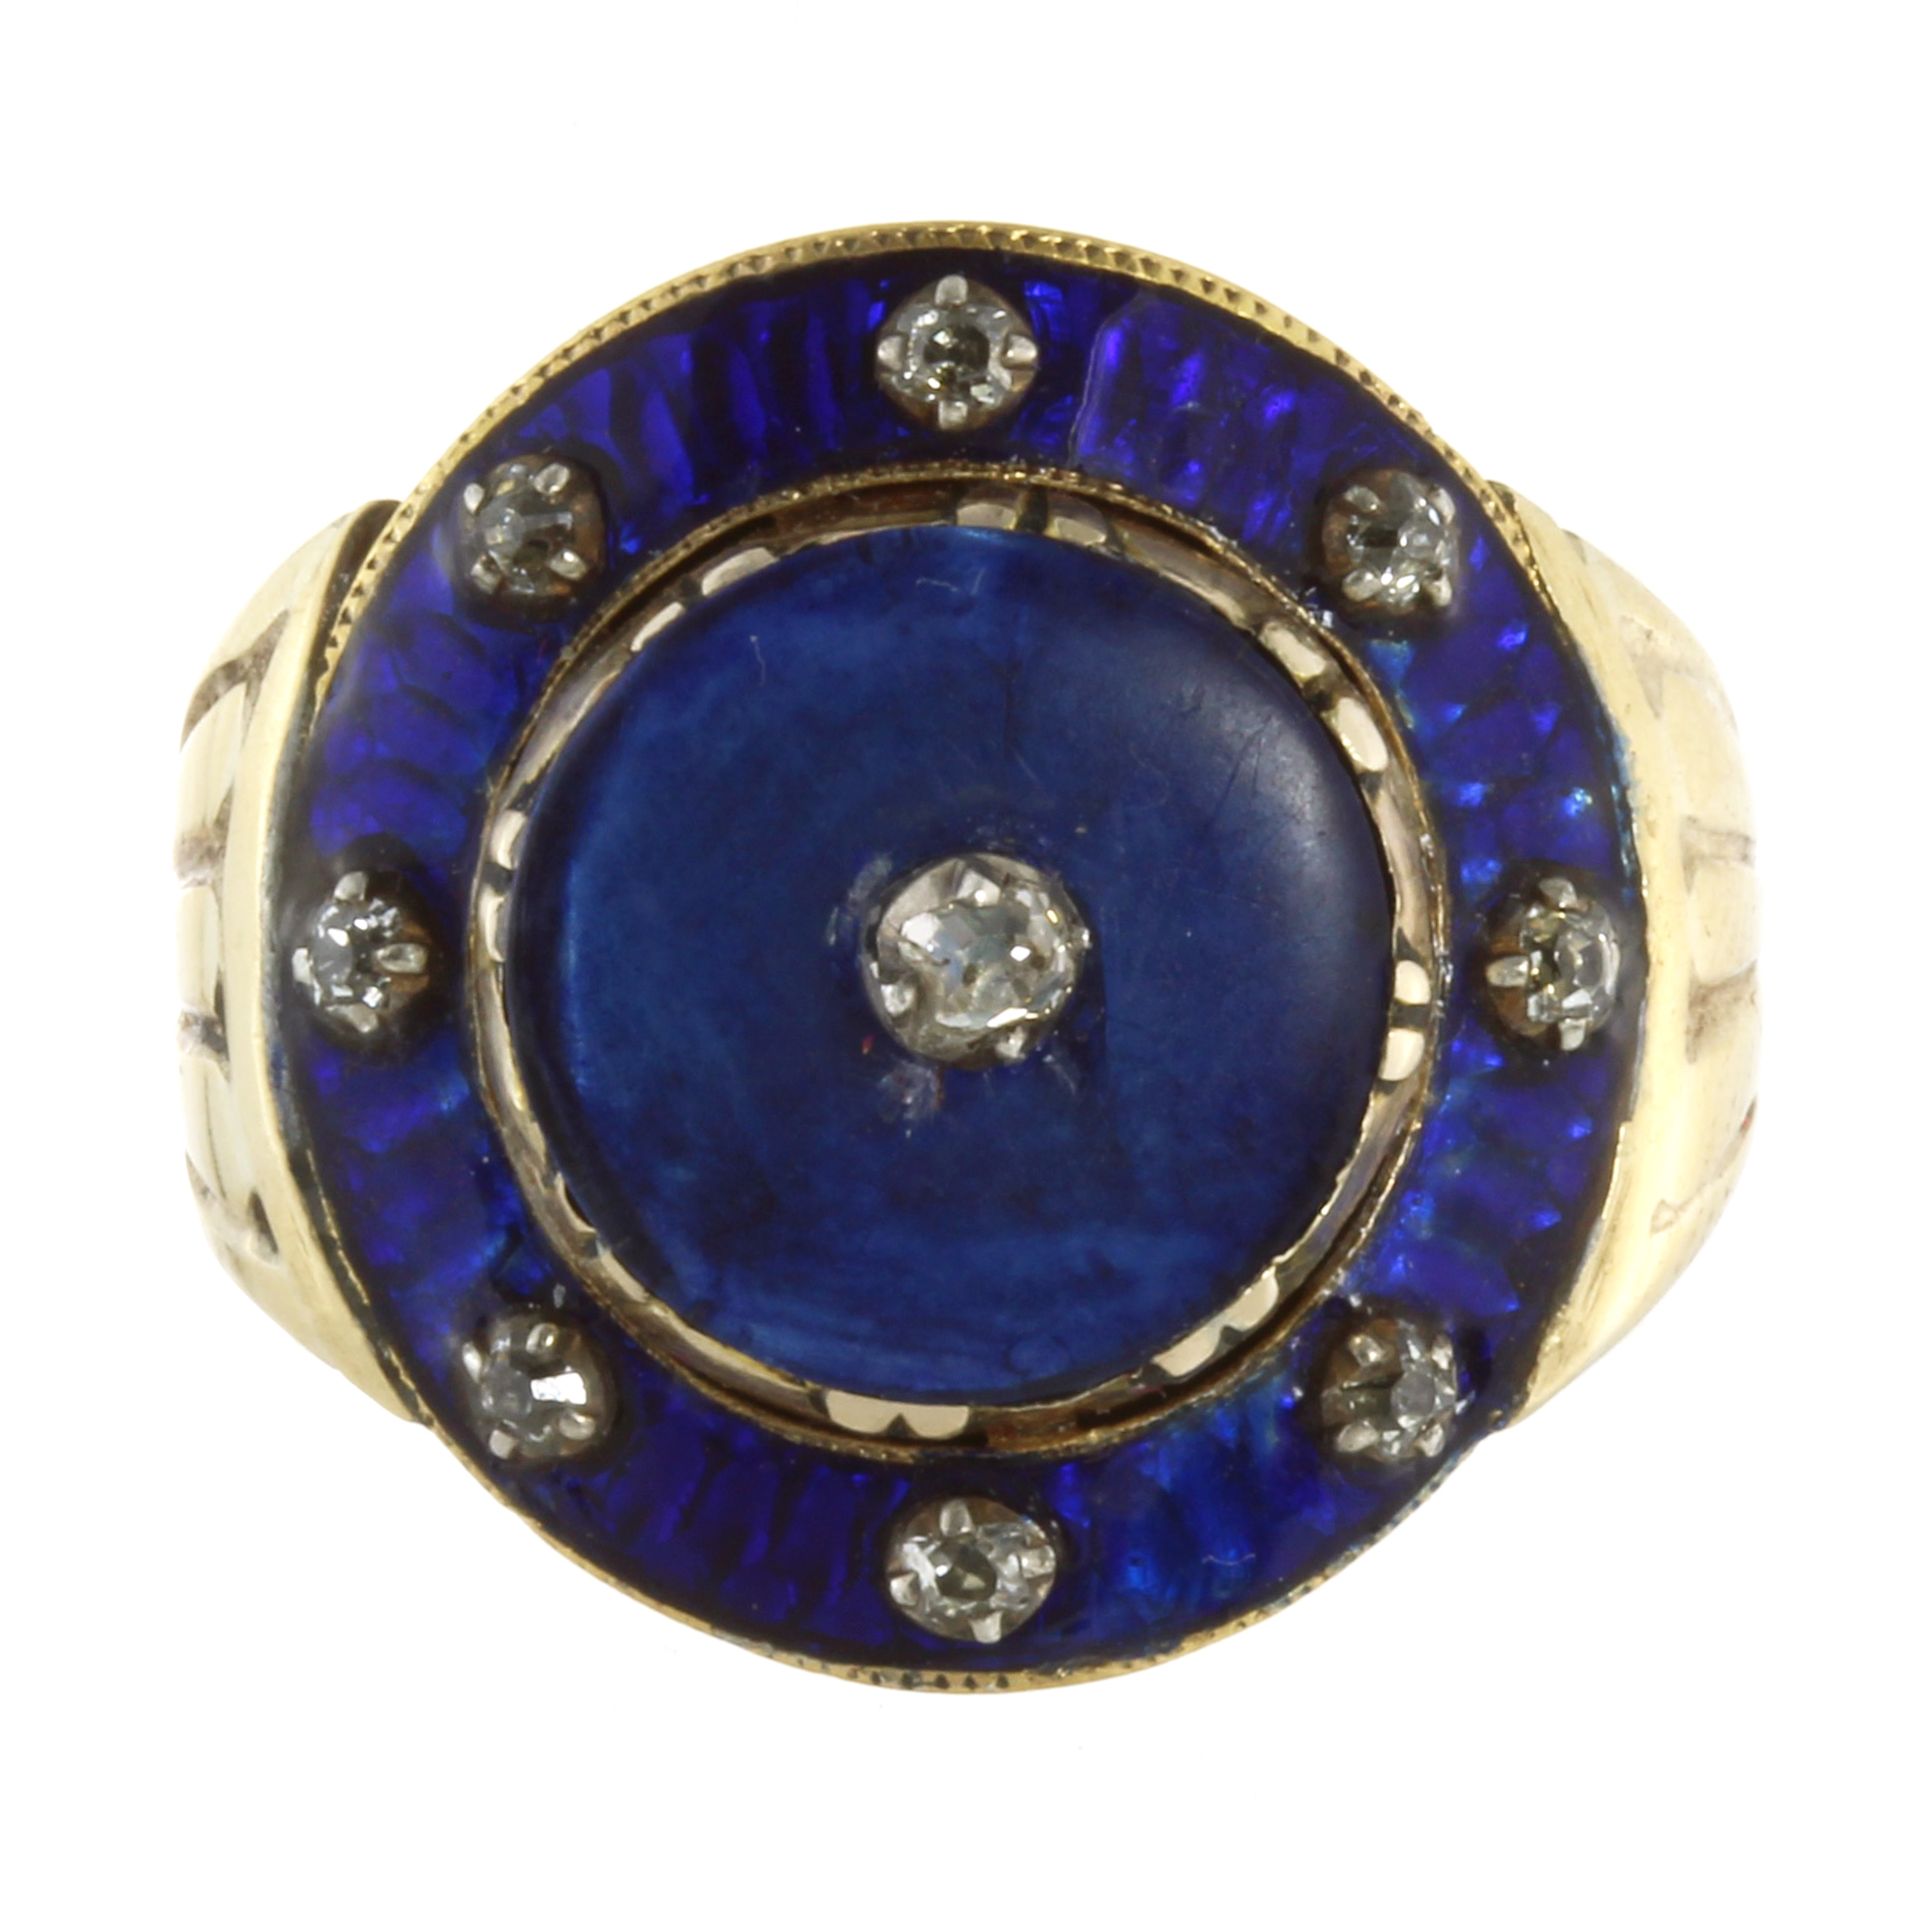 AN ANTIQUE ENAMEL AND DIAMOND DRESS RING in high carat yellow gold, the large blue enamel faced